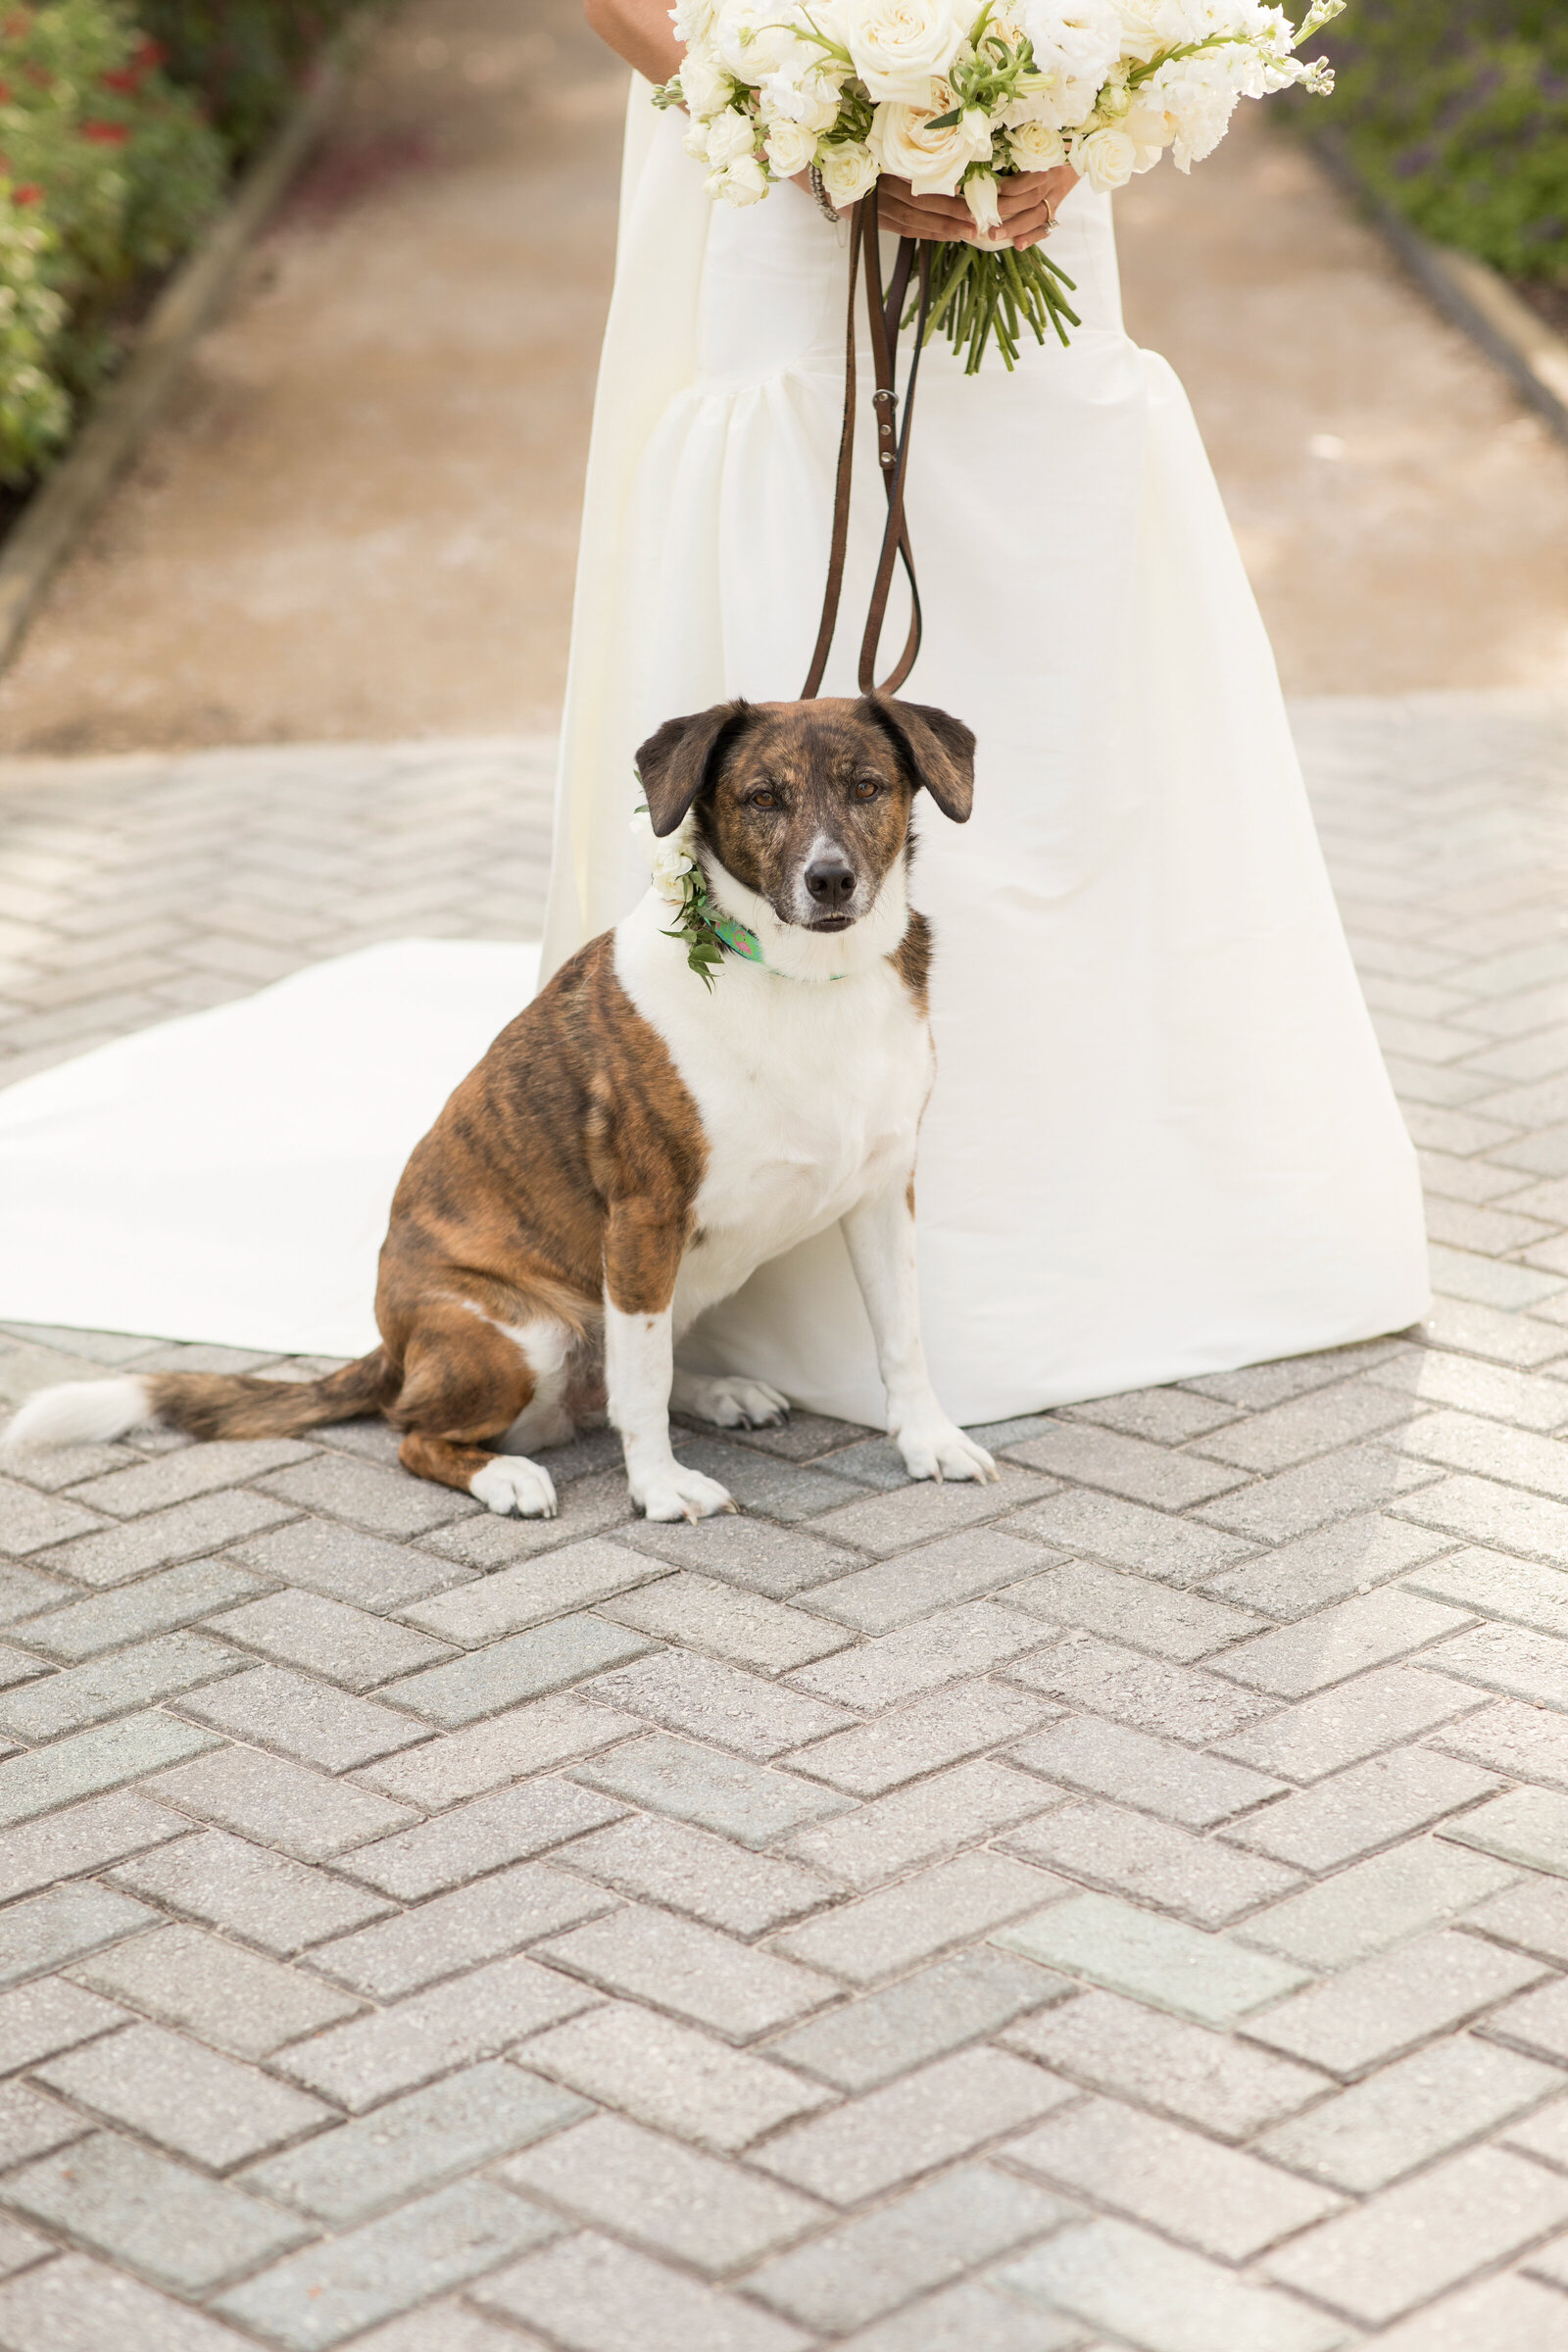 Gorgeous bridal moment between the bride and her dog at her destination wedding